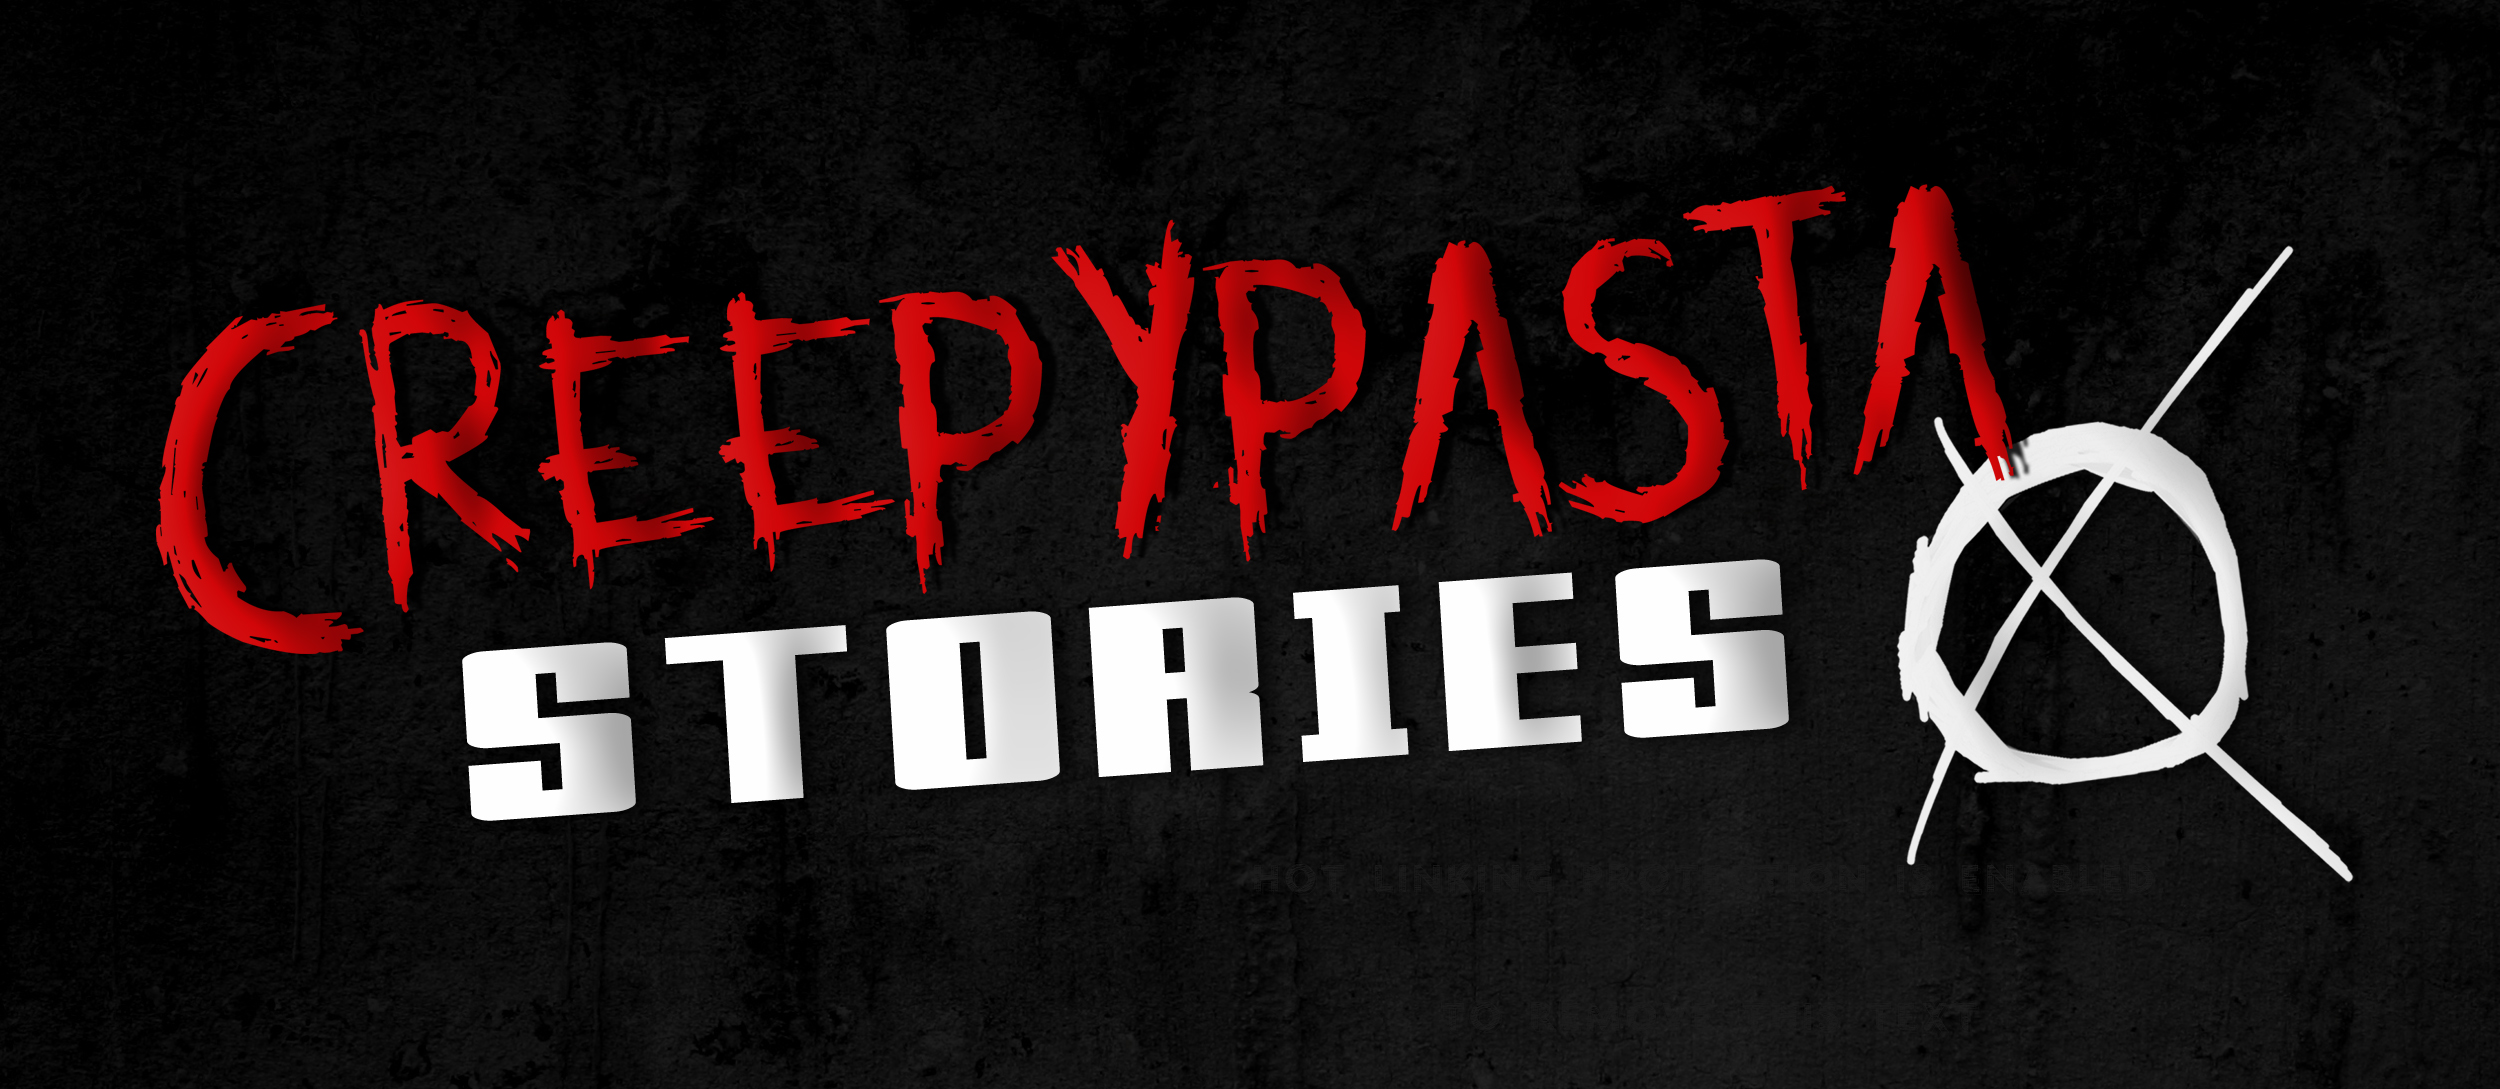 The Infinite Creepypasta Horror Fiction Stories From Author J M